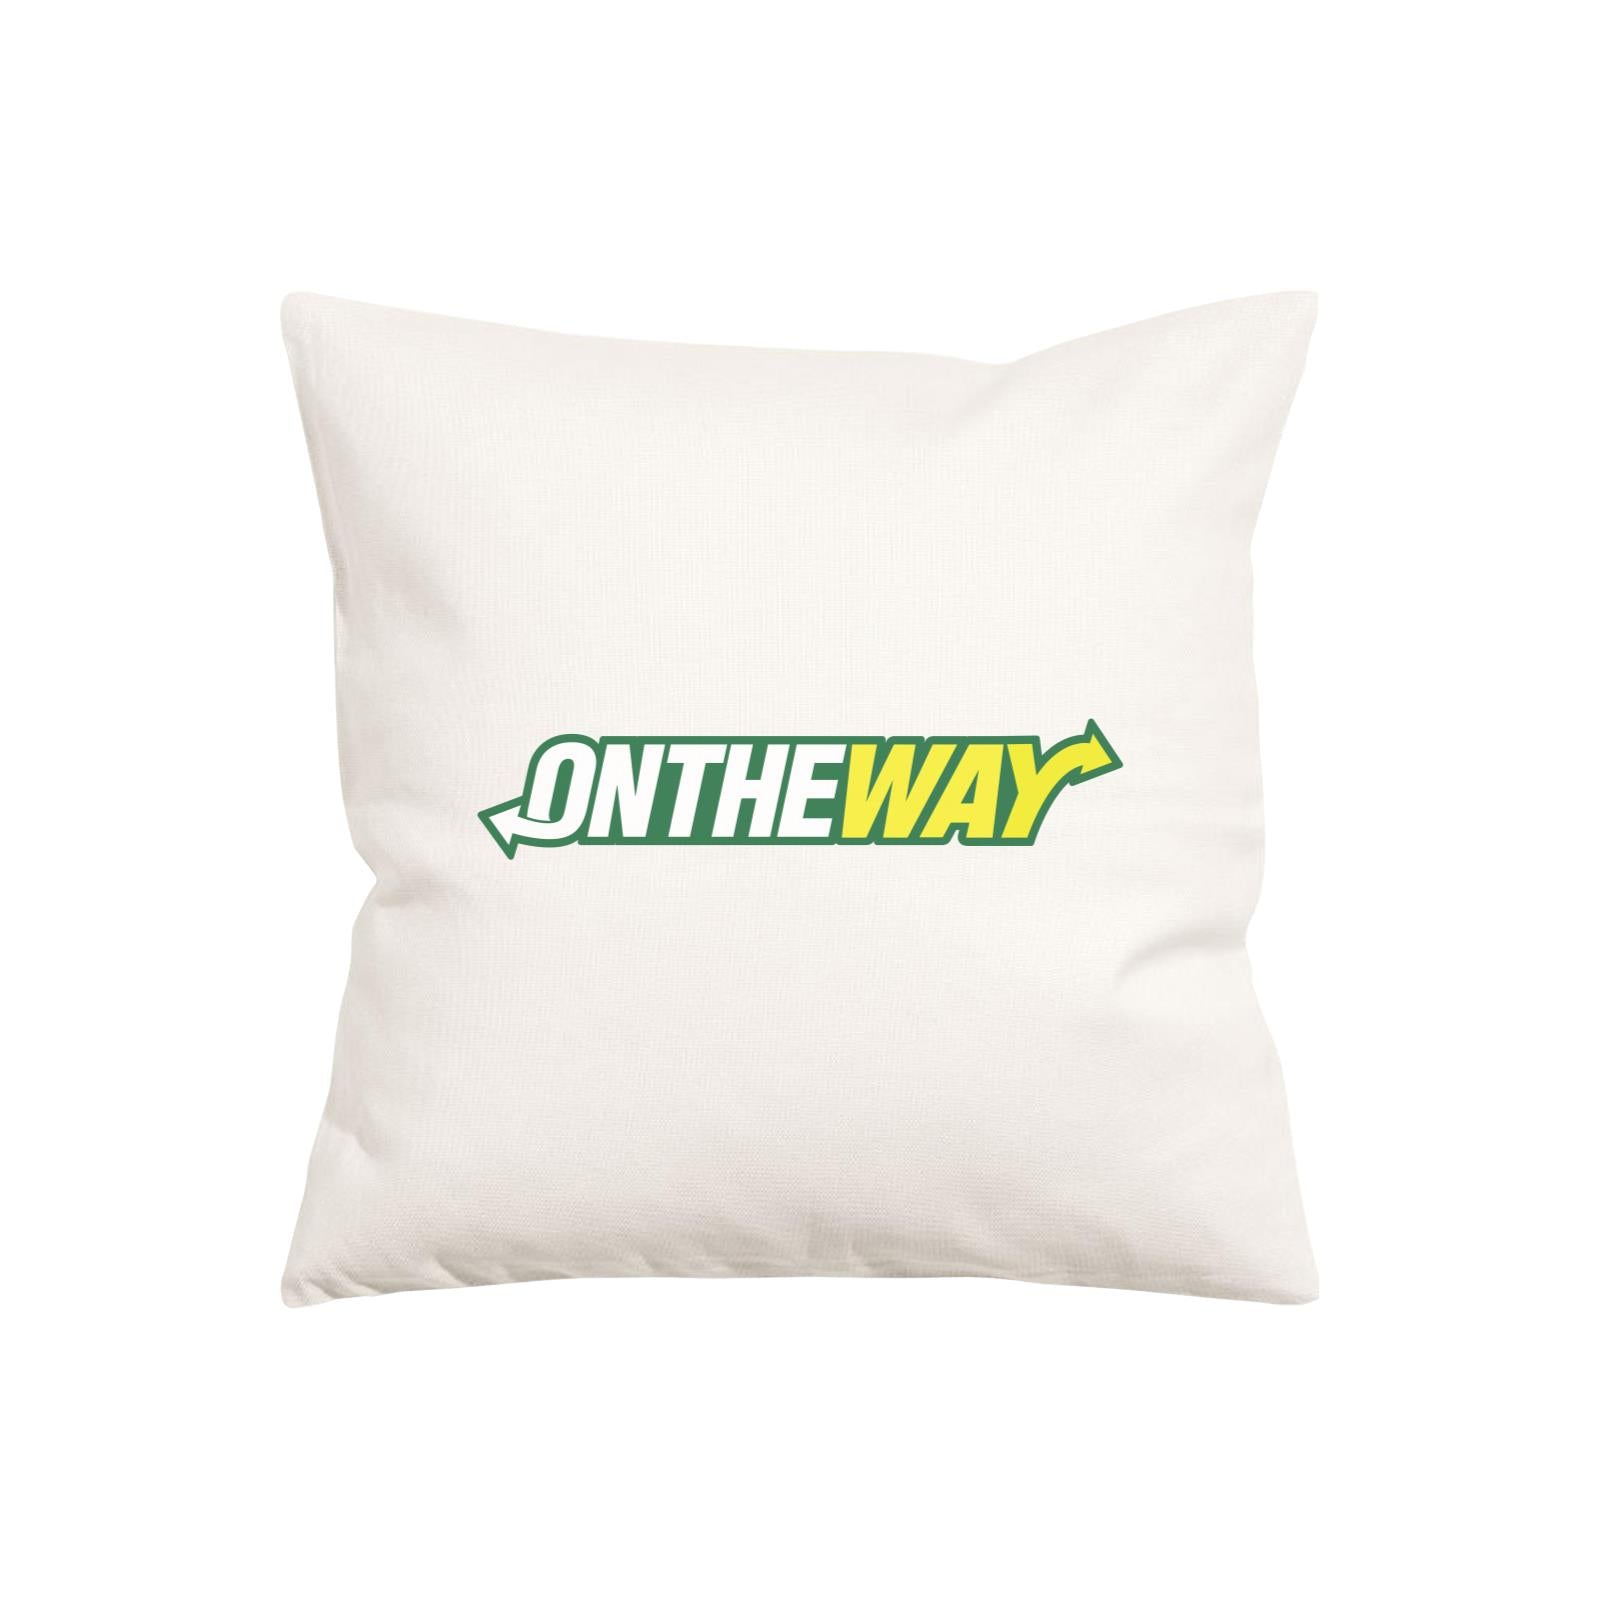 Slang Statement On The Way Pillow Cushion